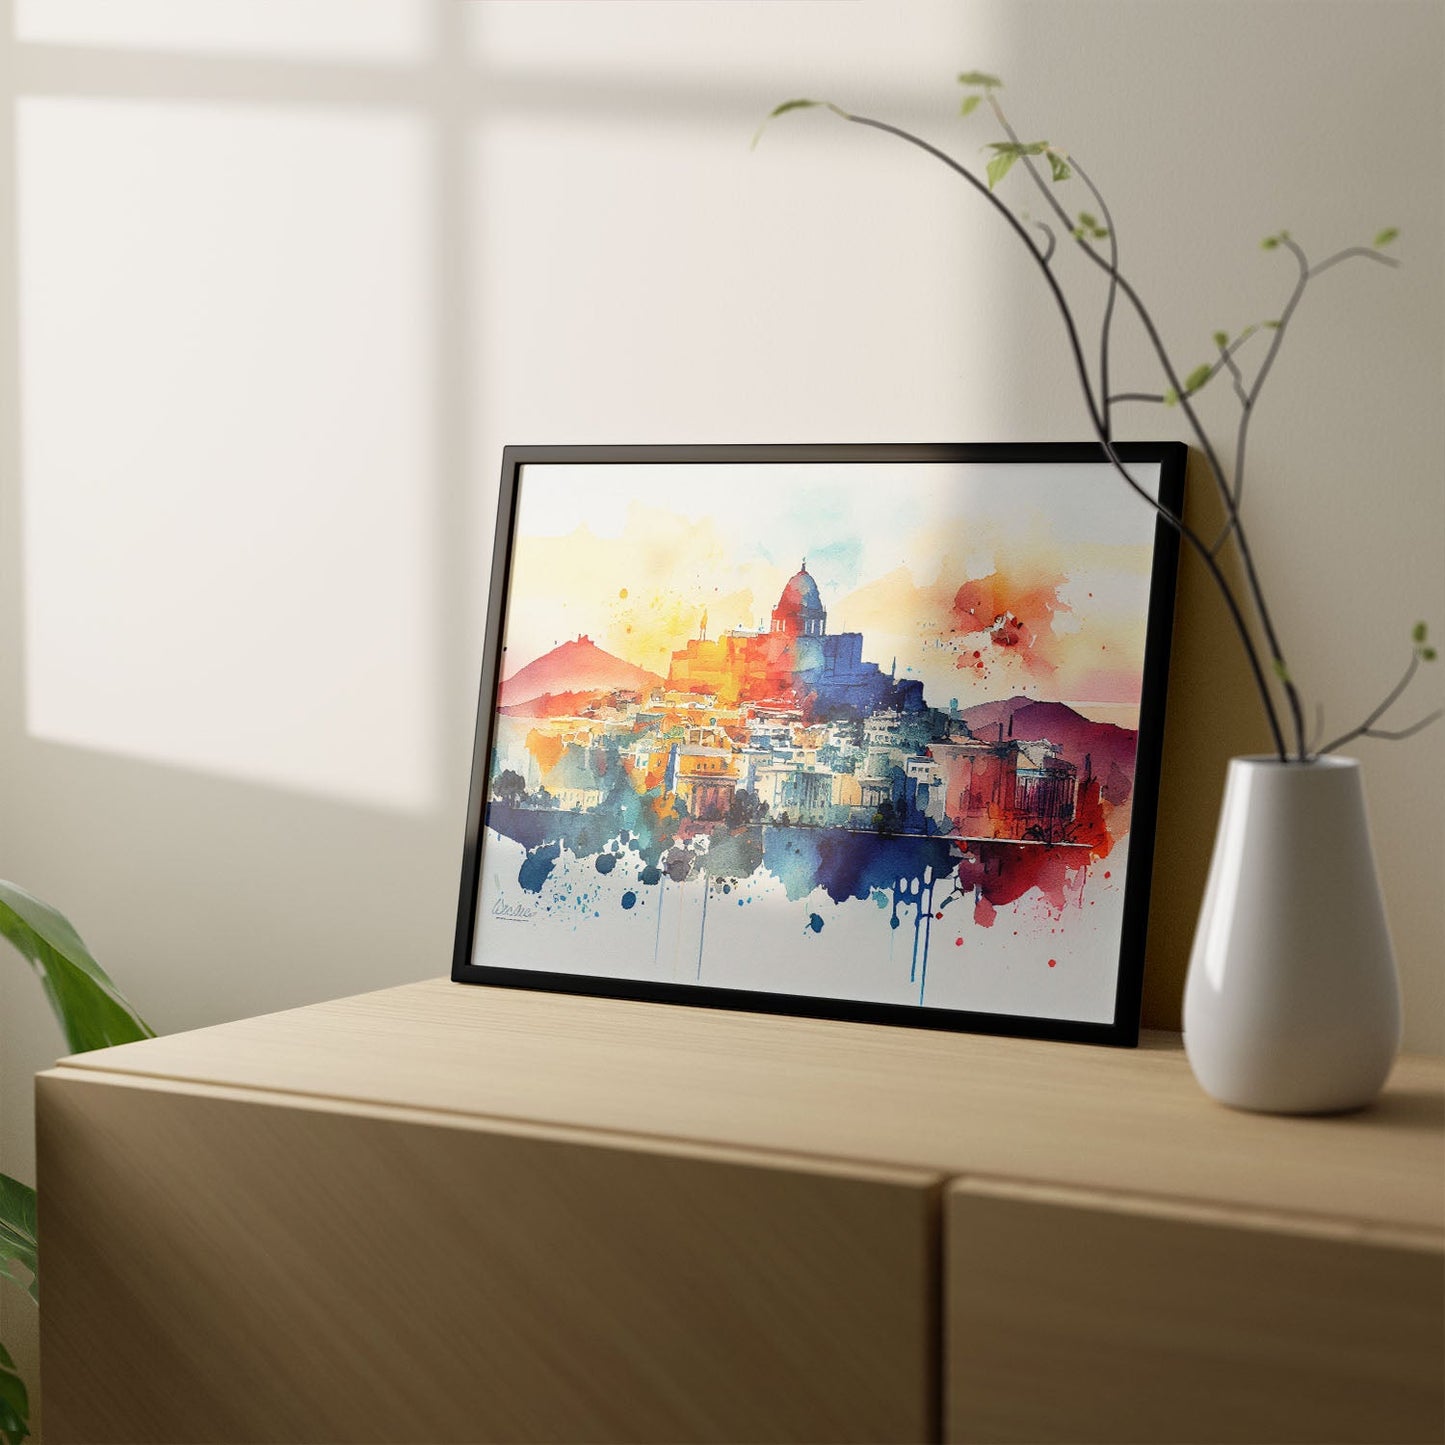 Nacnic watercolor of a skyline of the city of Athens. Aesthetic Wall Art Prints for Bedroom or Living Room Design.-Artwork-Nacnic-A4-Sin Marco-Nacnic Estudio SL